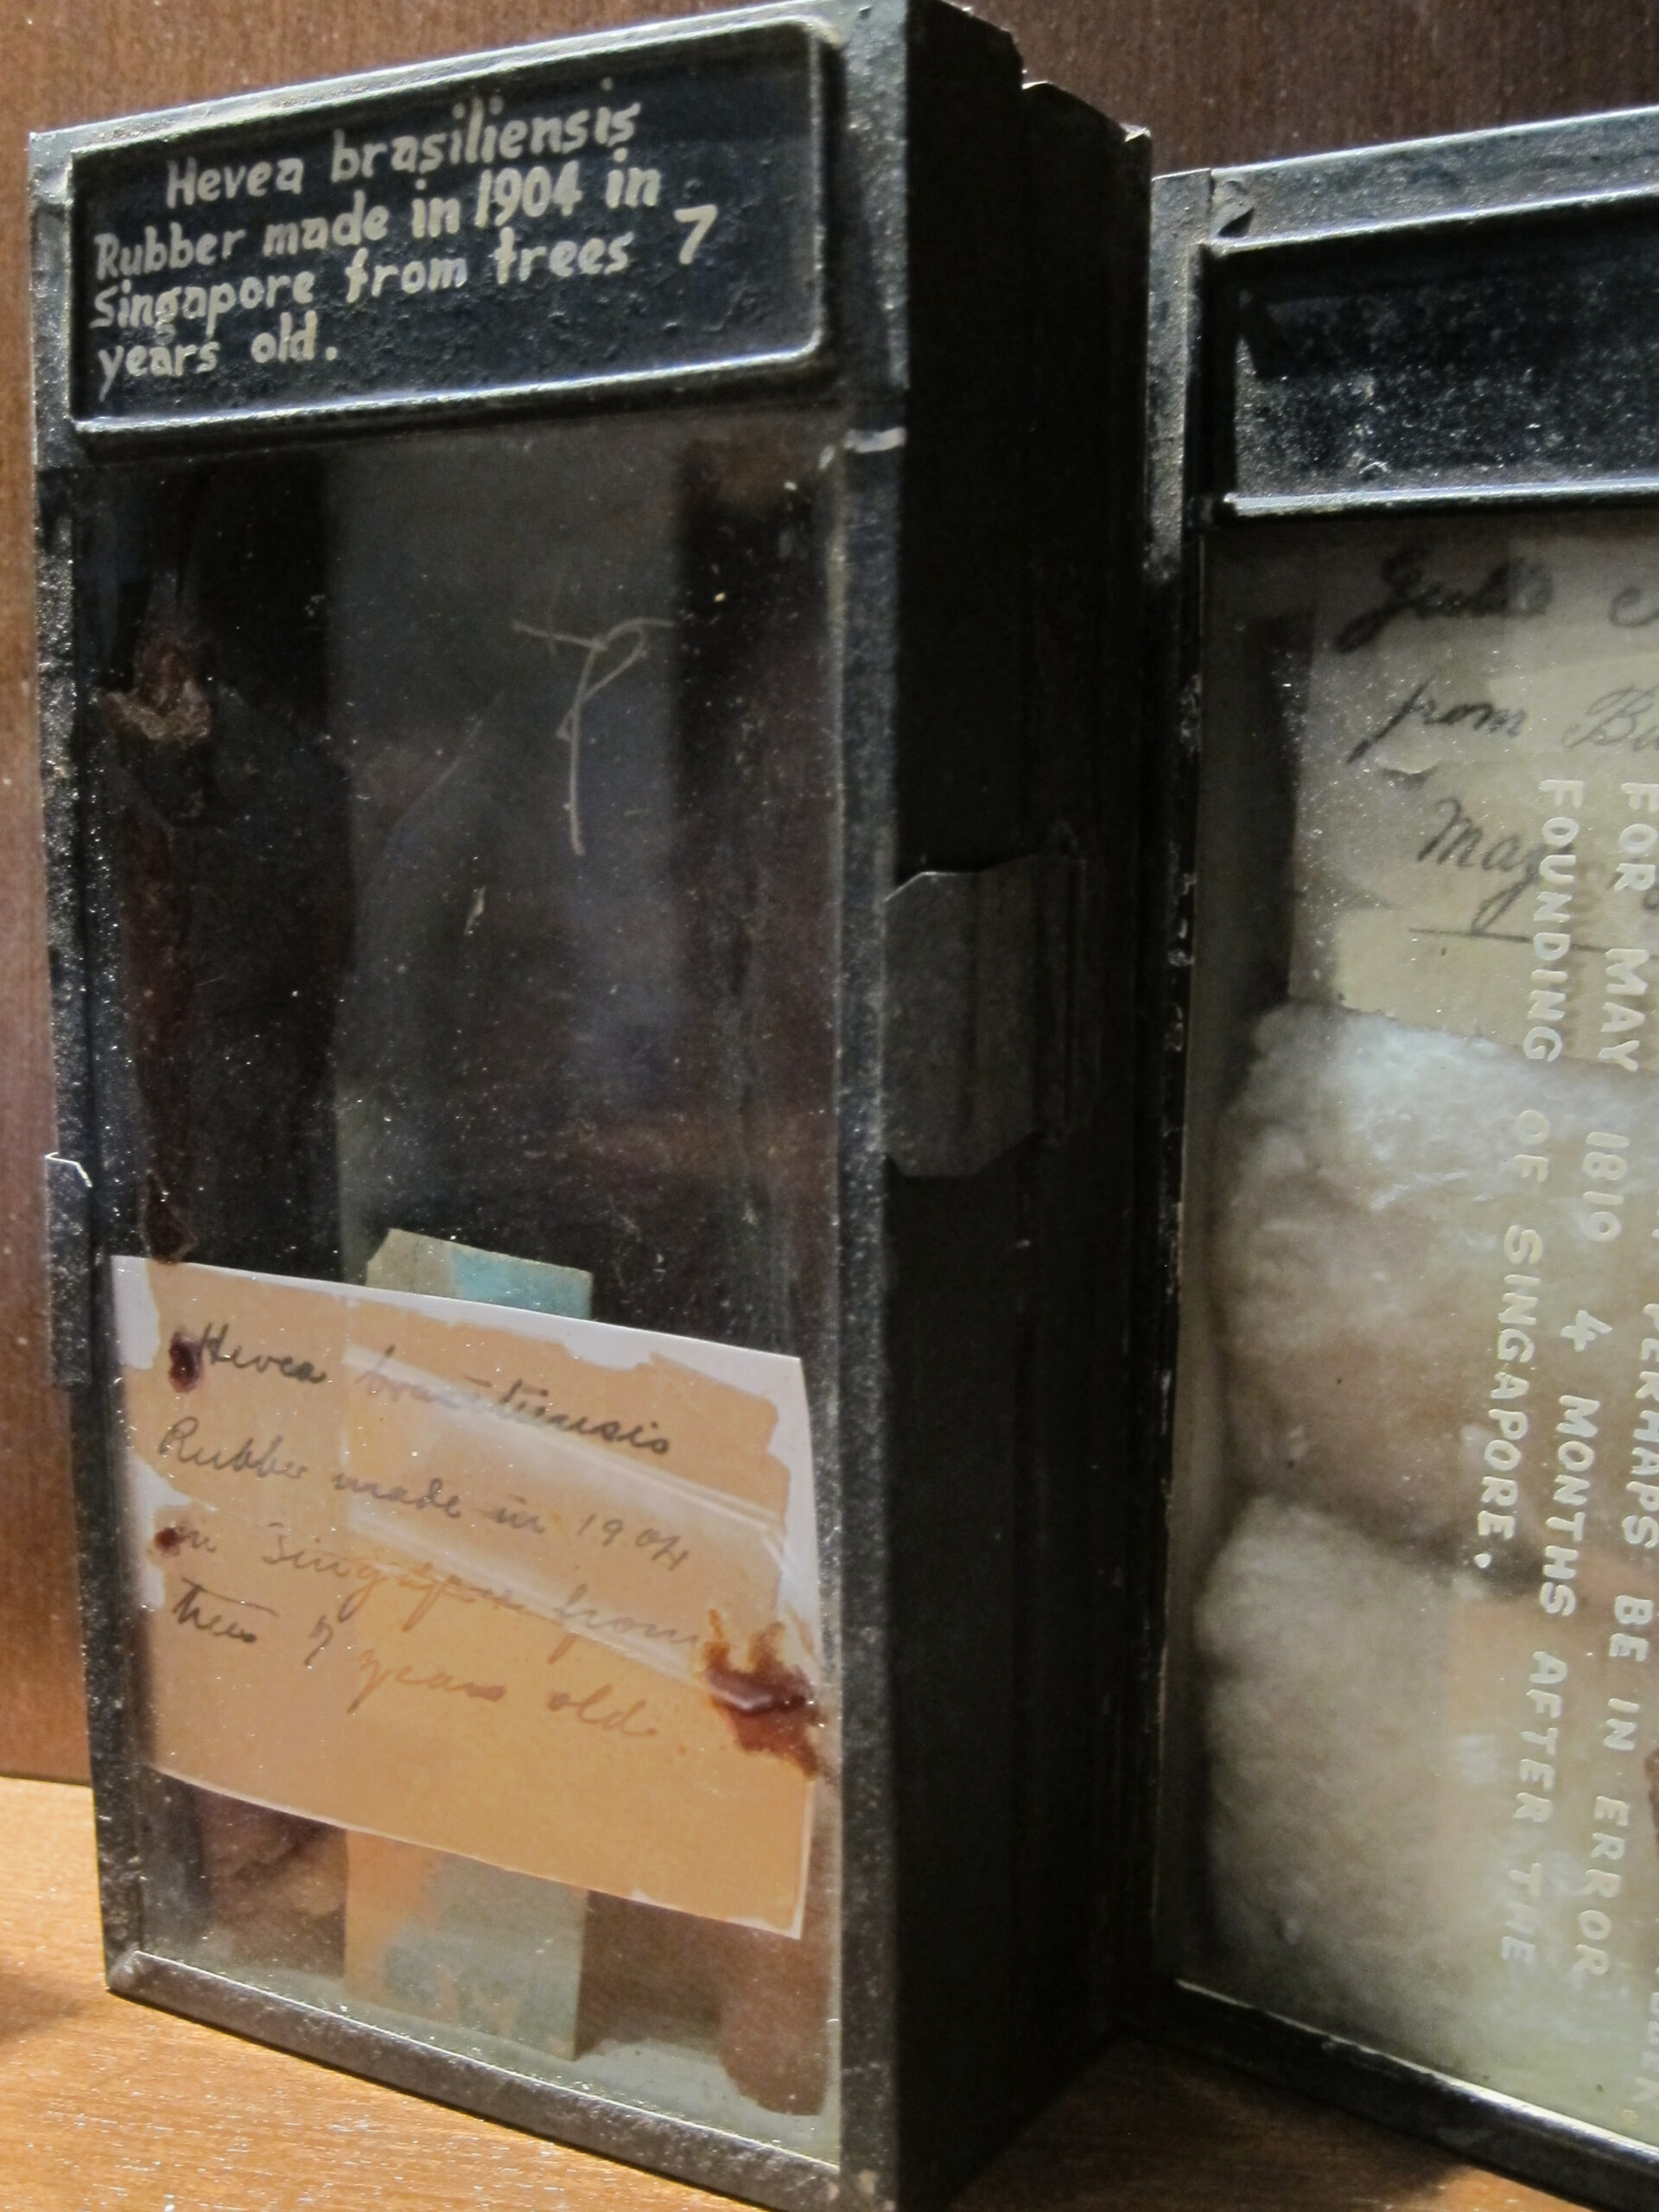 Box showing rubber from 1904, in the Singapore Botanical Garden